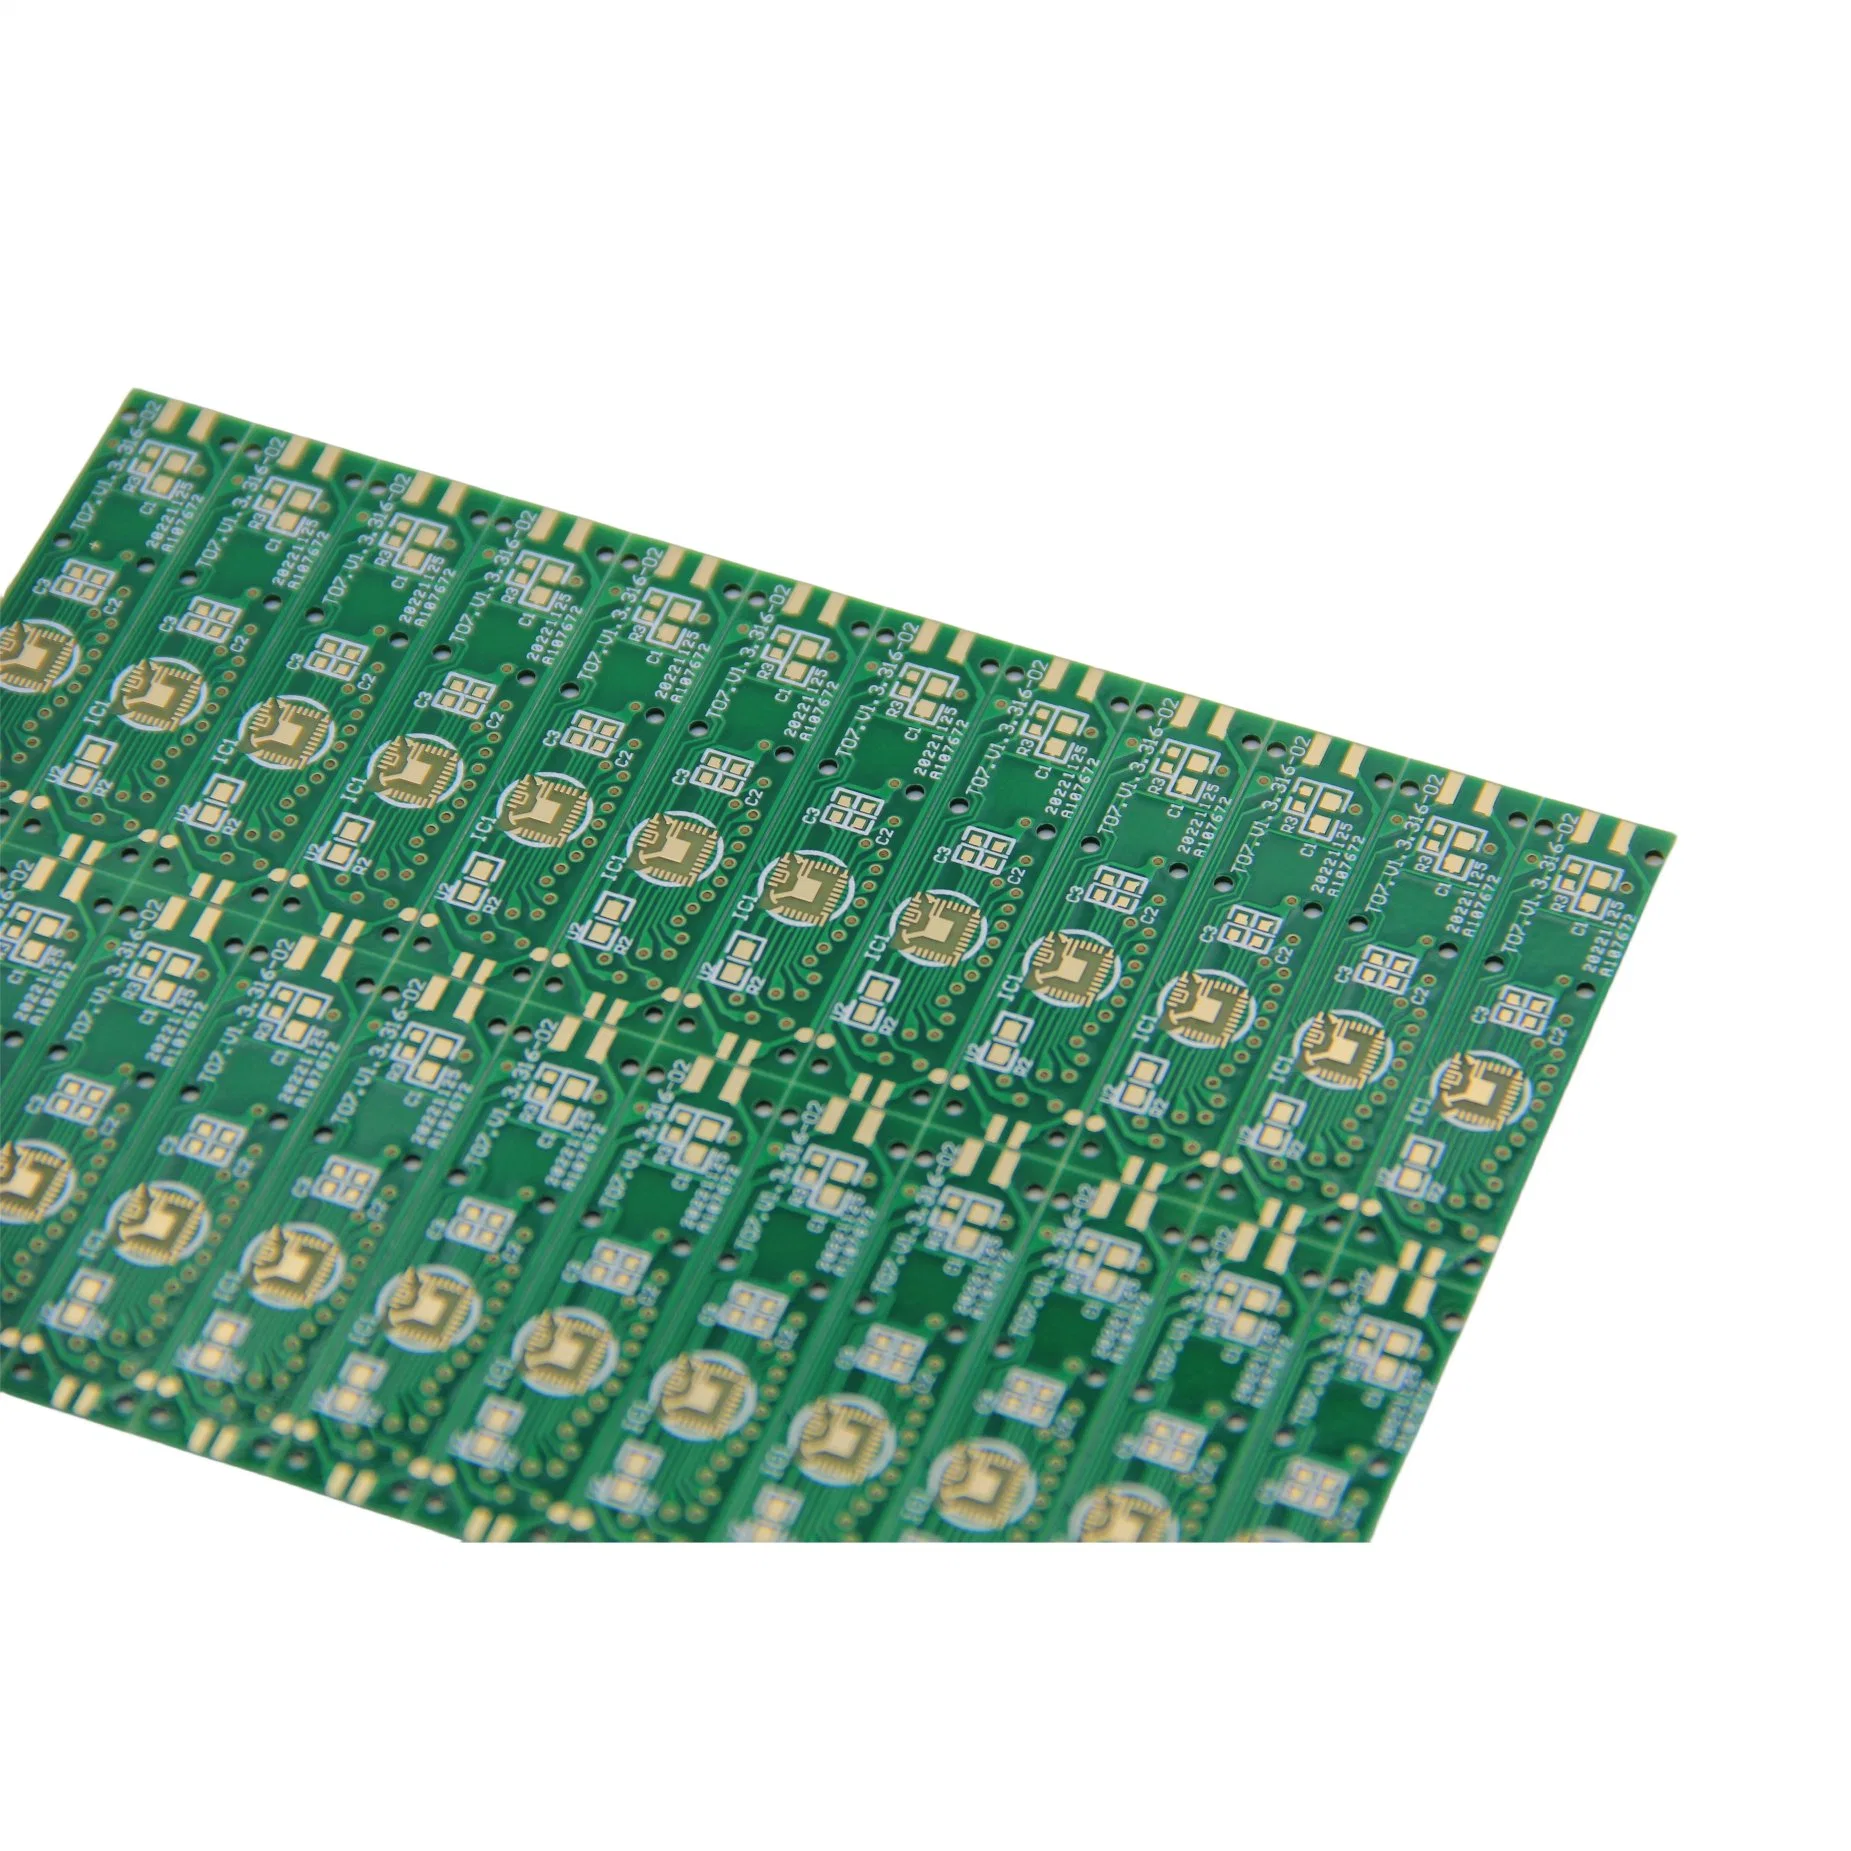 Medical Device, Thermometer Circuit Board, PCB